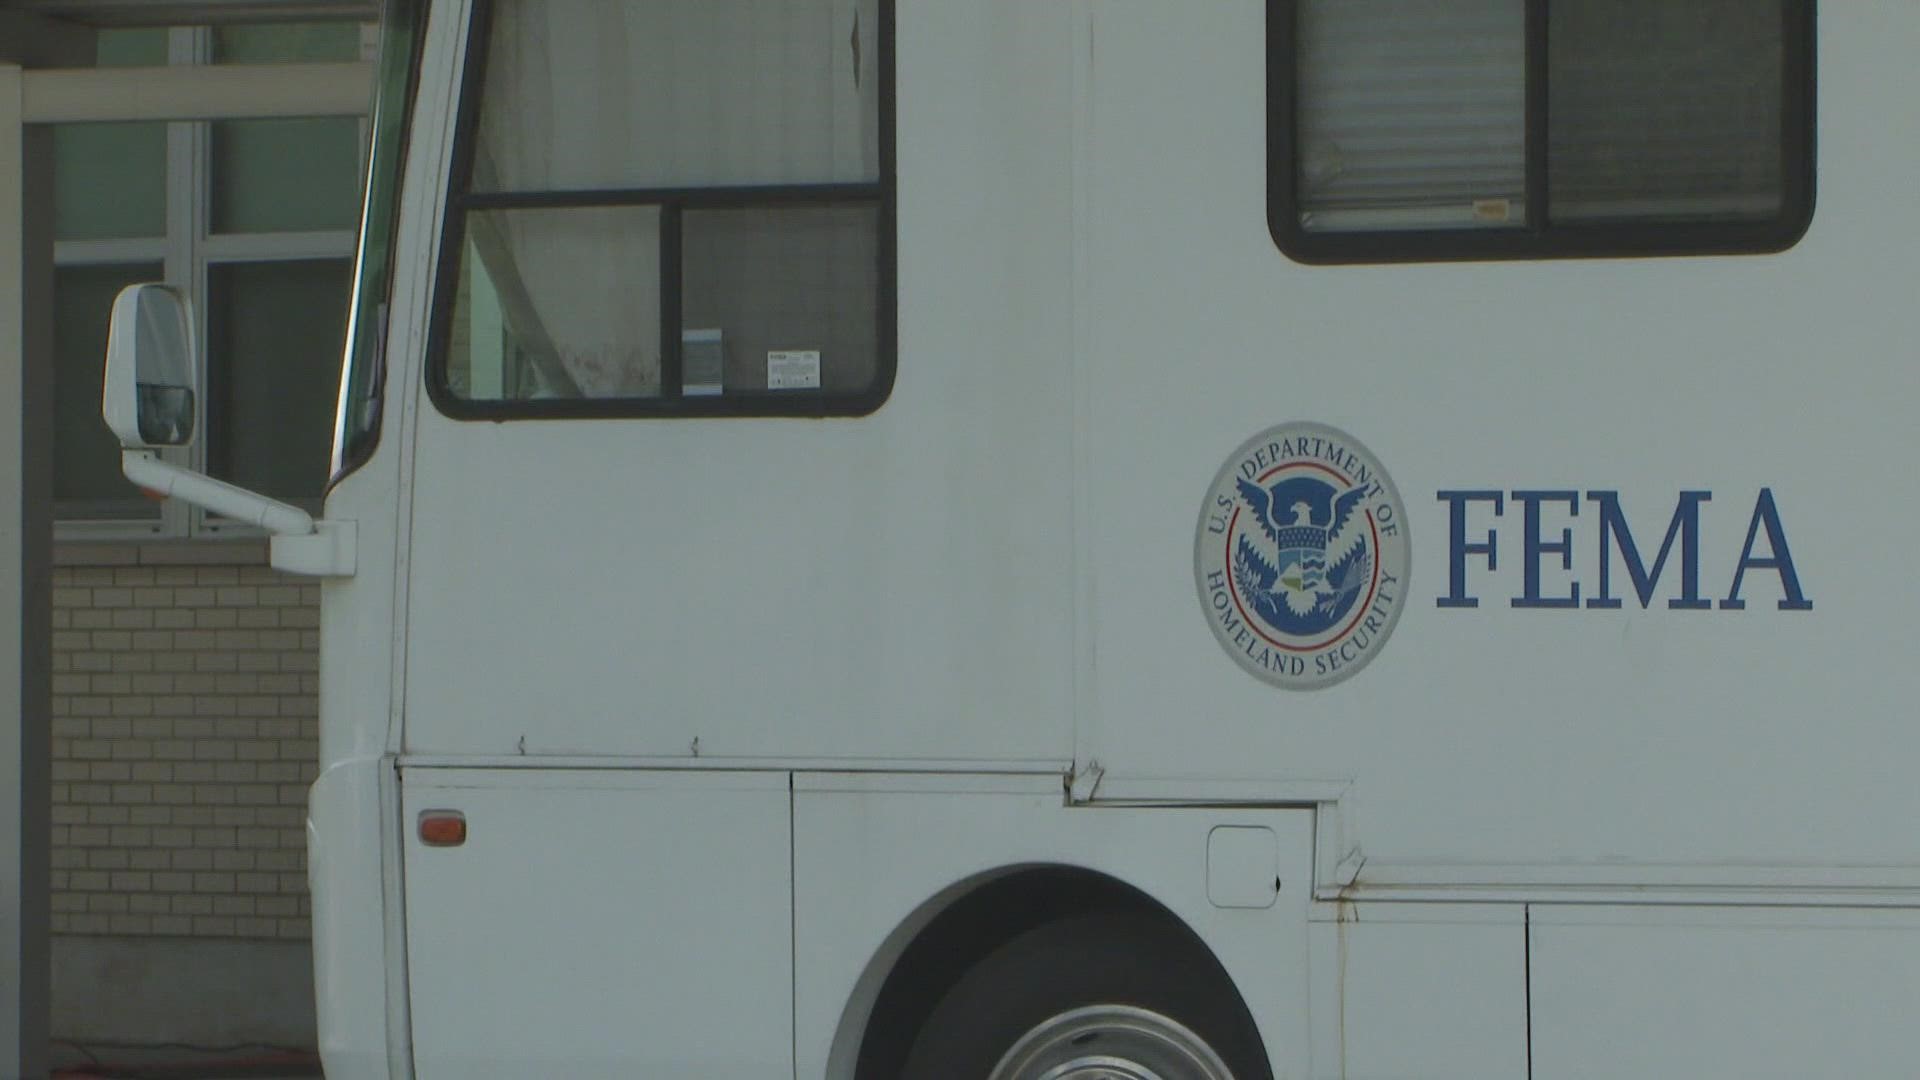 Ida victims are looking for help from FEMA to apply for financial assistance after sustaining damages and loss form the storm.